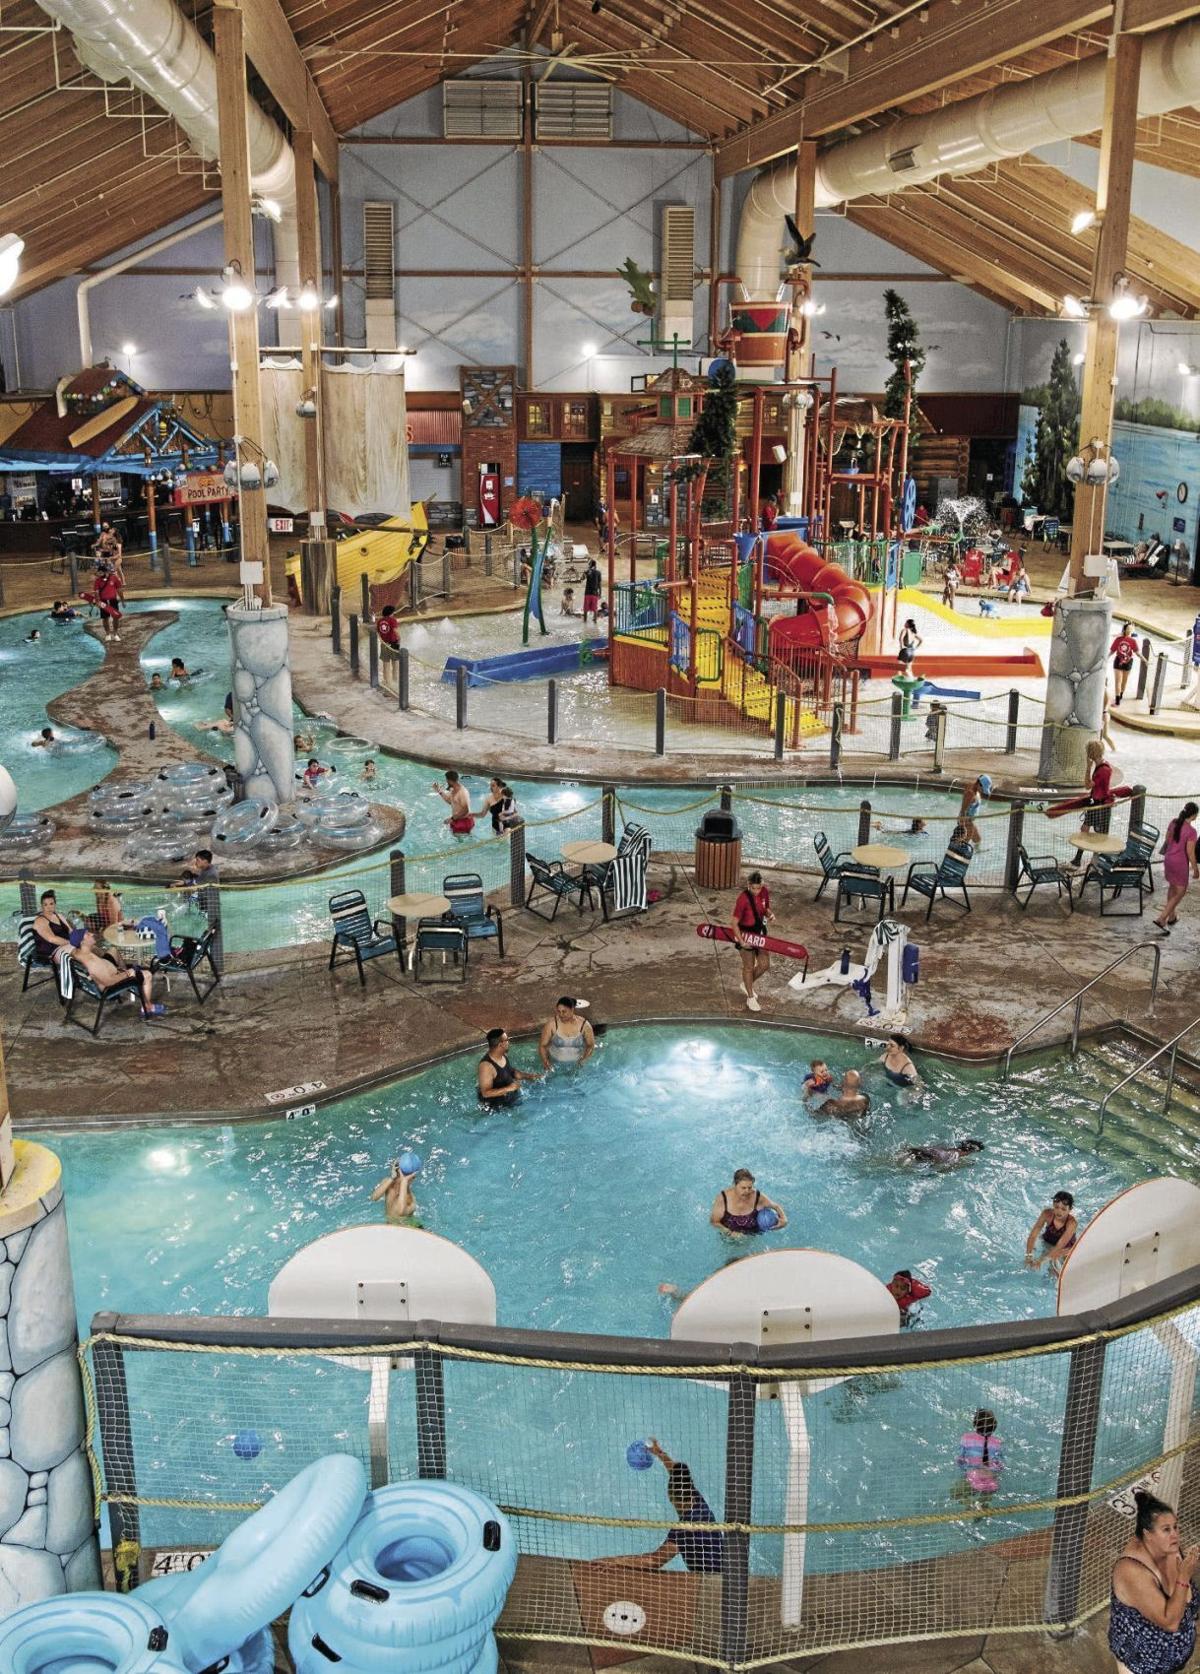 US-NEWS-GREAT-WOLF-LODGE NEW-ENGLAND-REOPENS-2-TGW.jpg